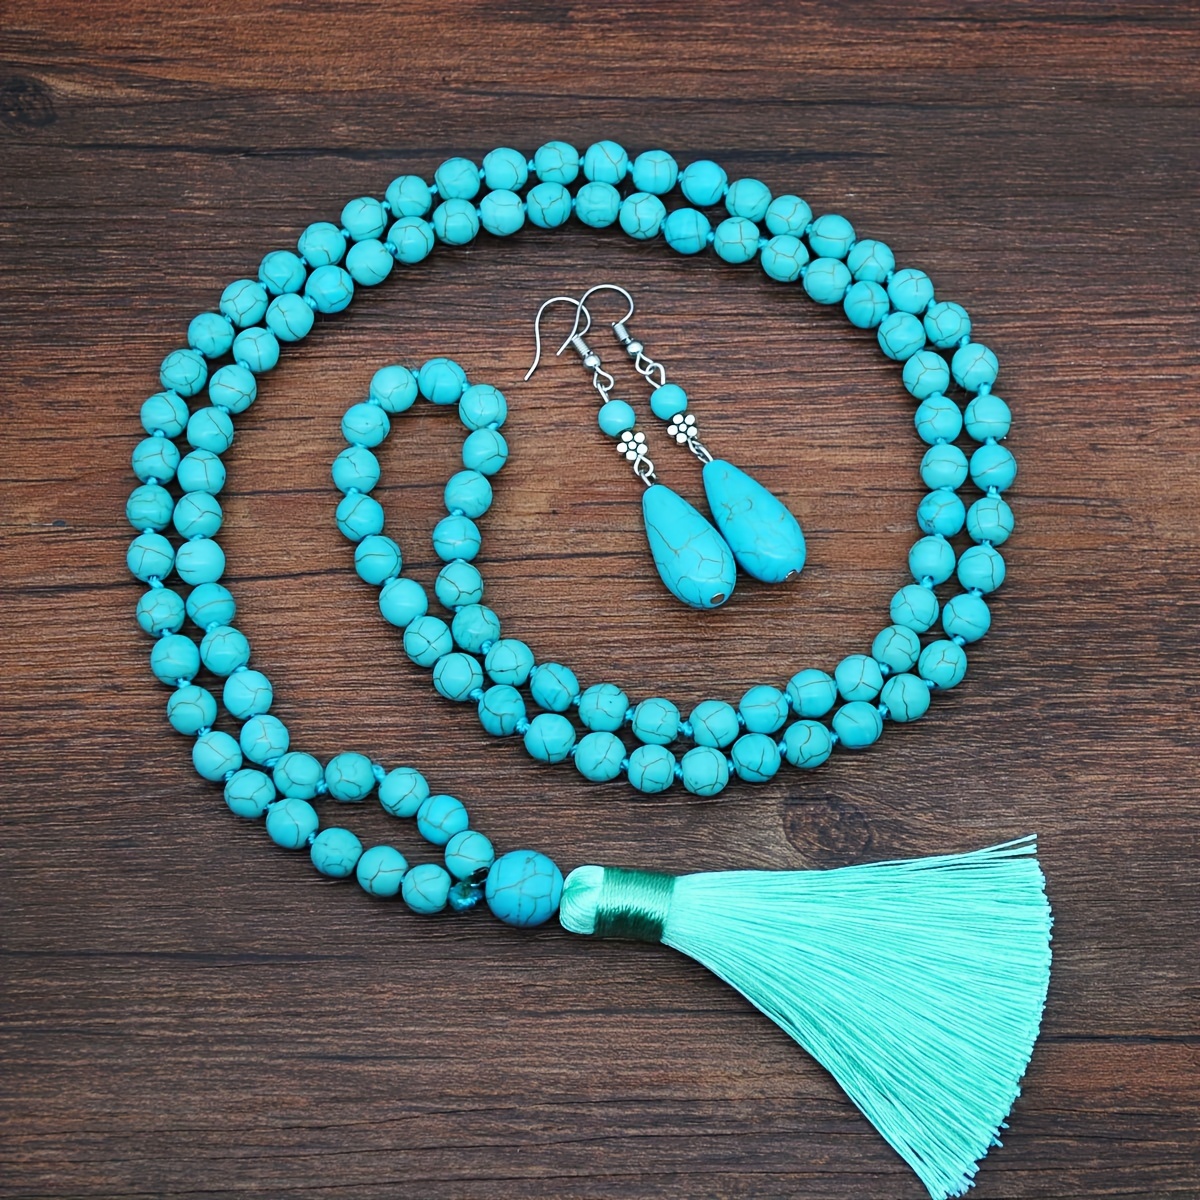 

Women Bohemian Turquosie Jewelry Set 8mm Round Beads Handmade Knotted Tassel Pendant Long Necklace + Dangle Earrings